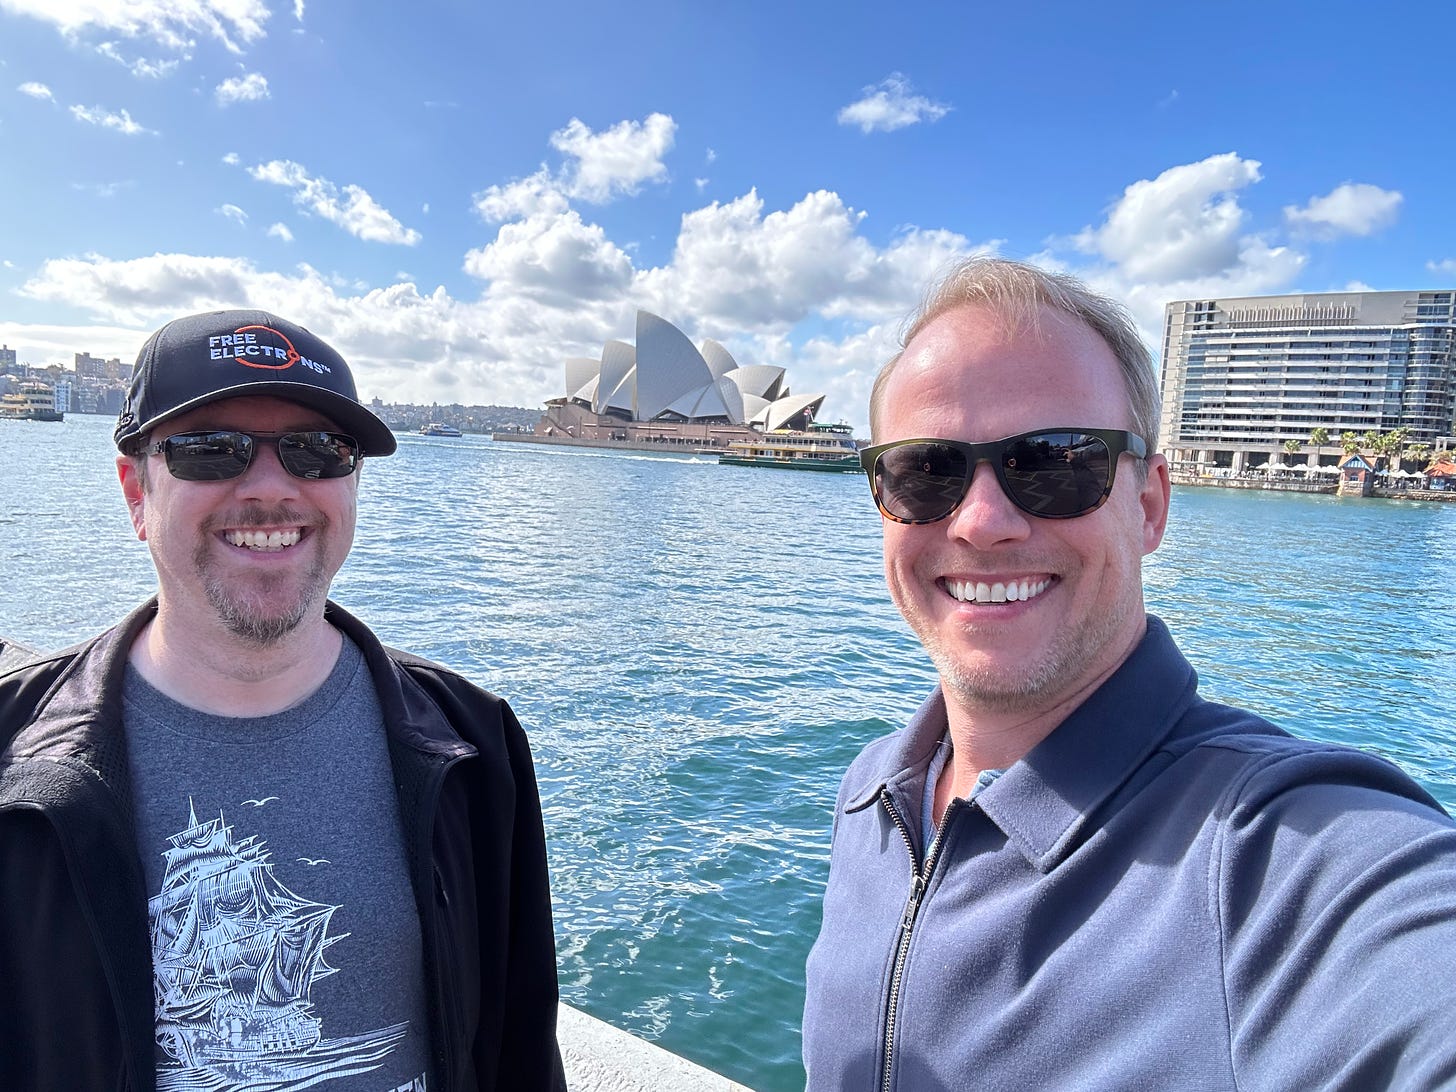 Brian and Tyler touring Sydney before Free Electrons